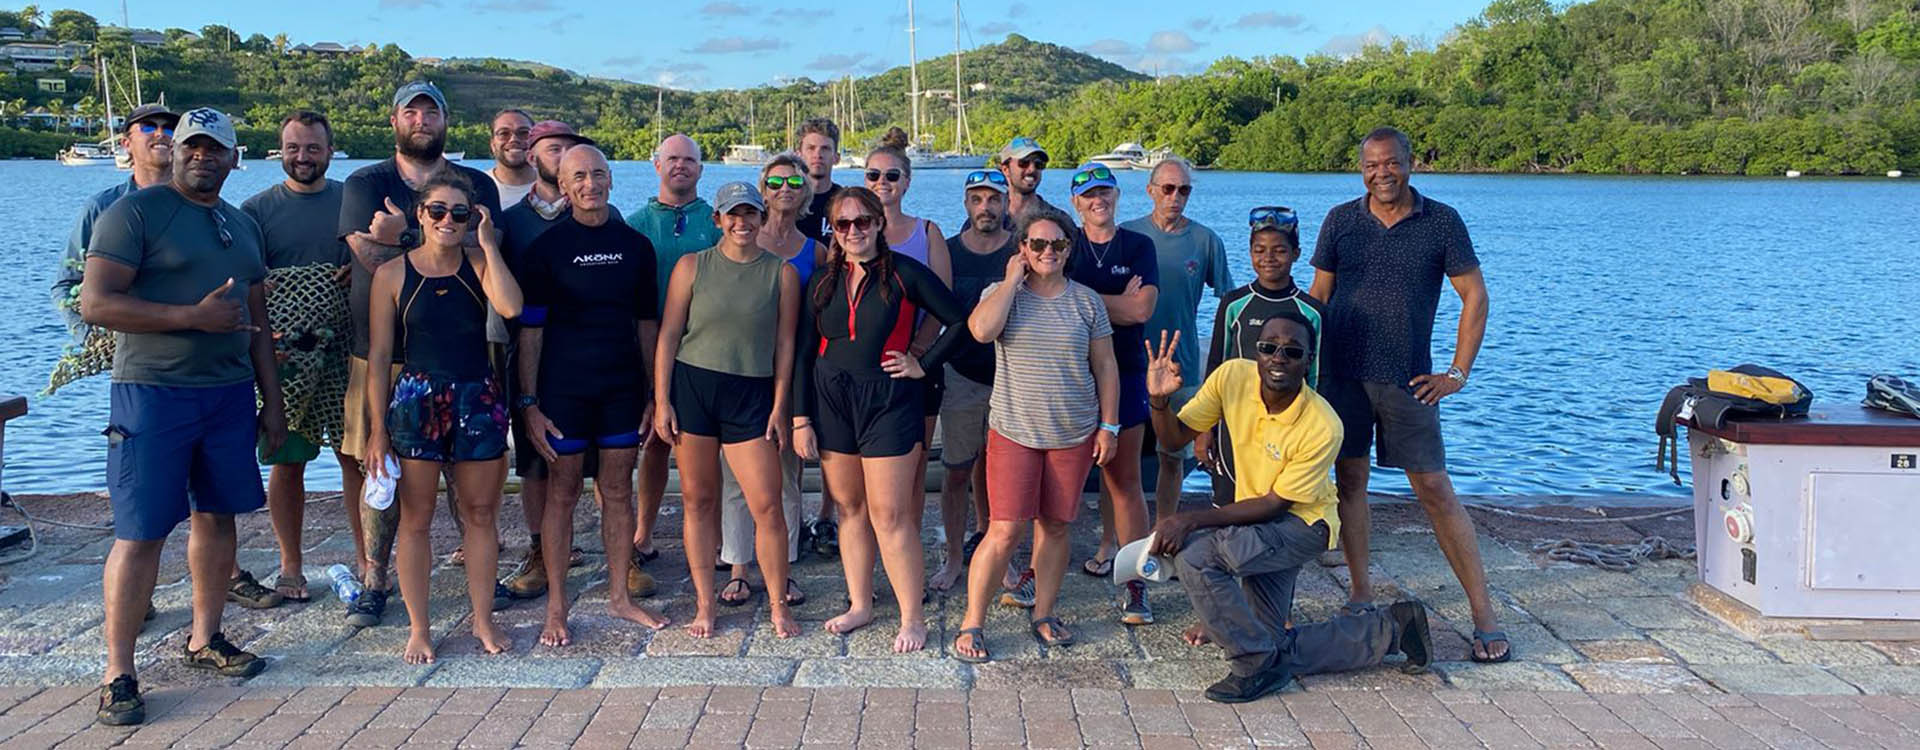 The Tank Bay Project collaborative team included ECU students, faculty and staff, the University of the West Indies, Association Archéologie Petites Antilles, and Antigua Naval Dockyard UNESCO World Heritage staff.